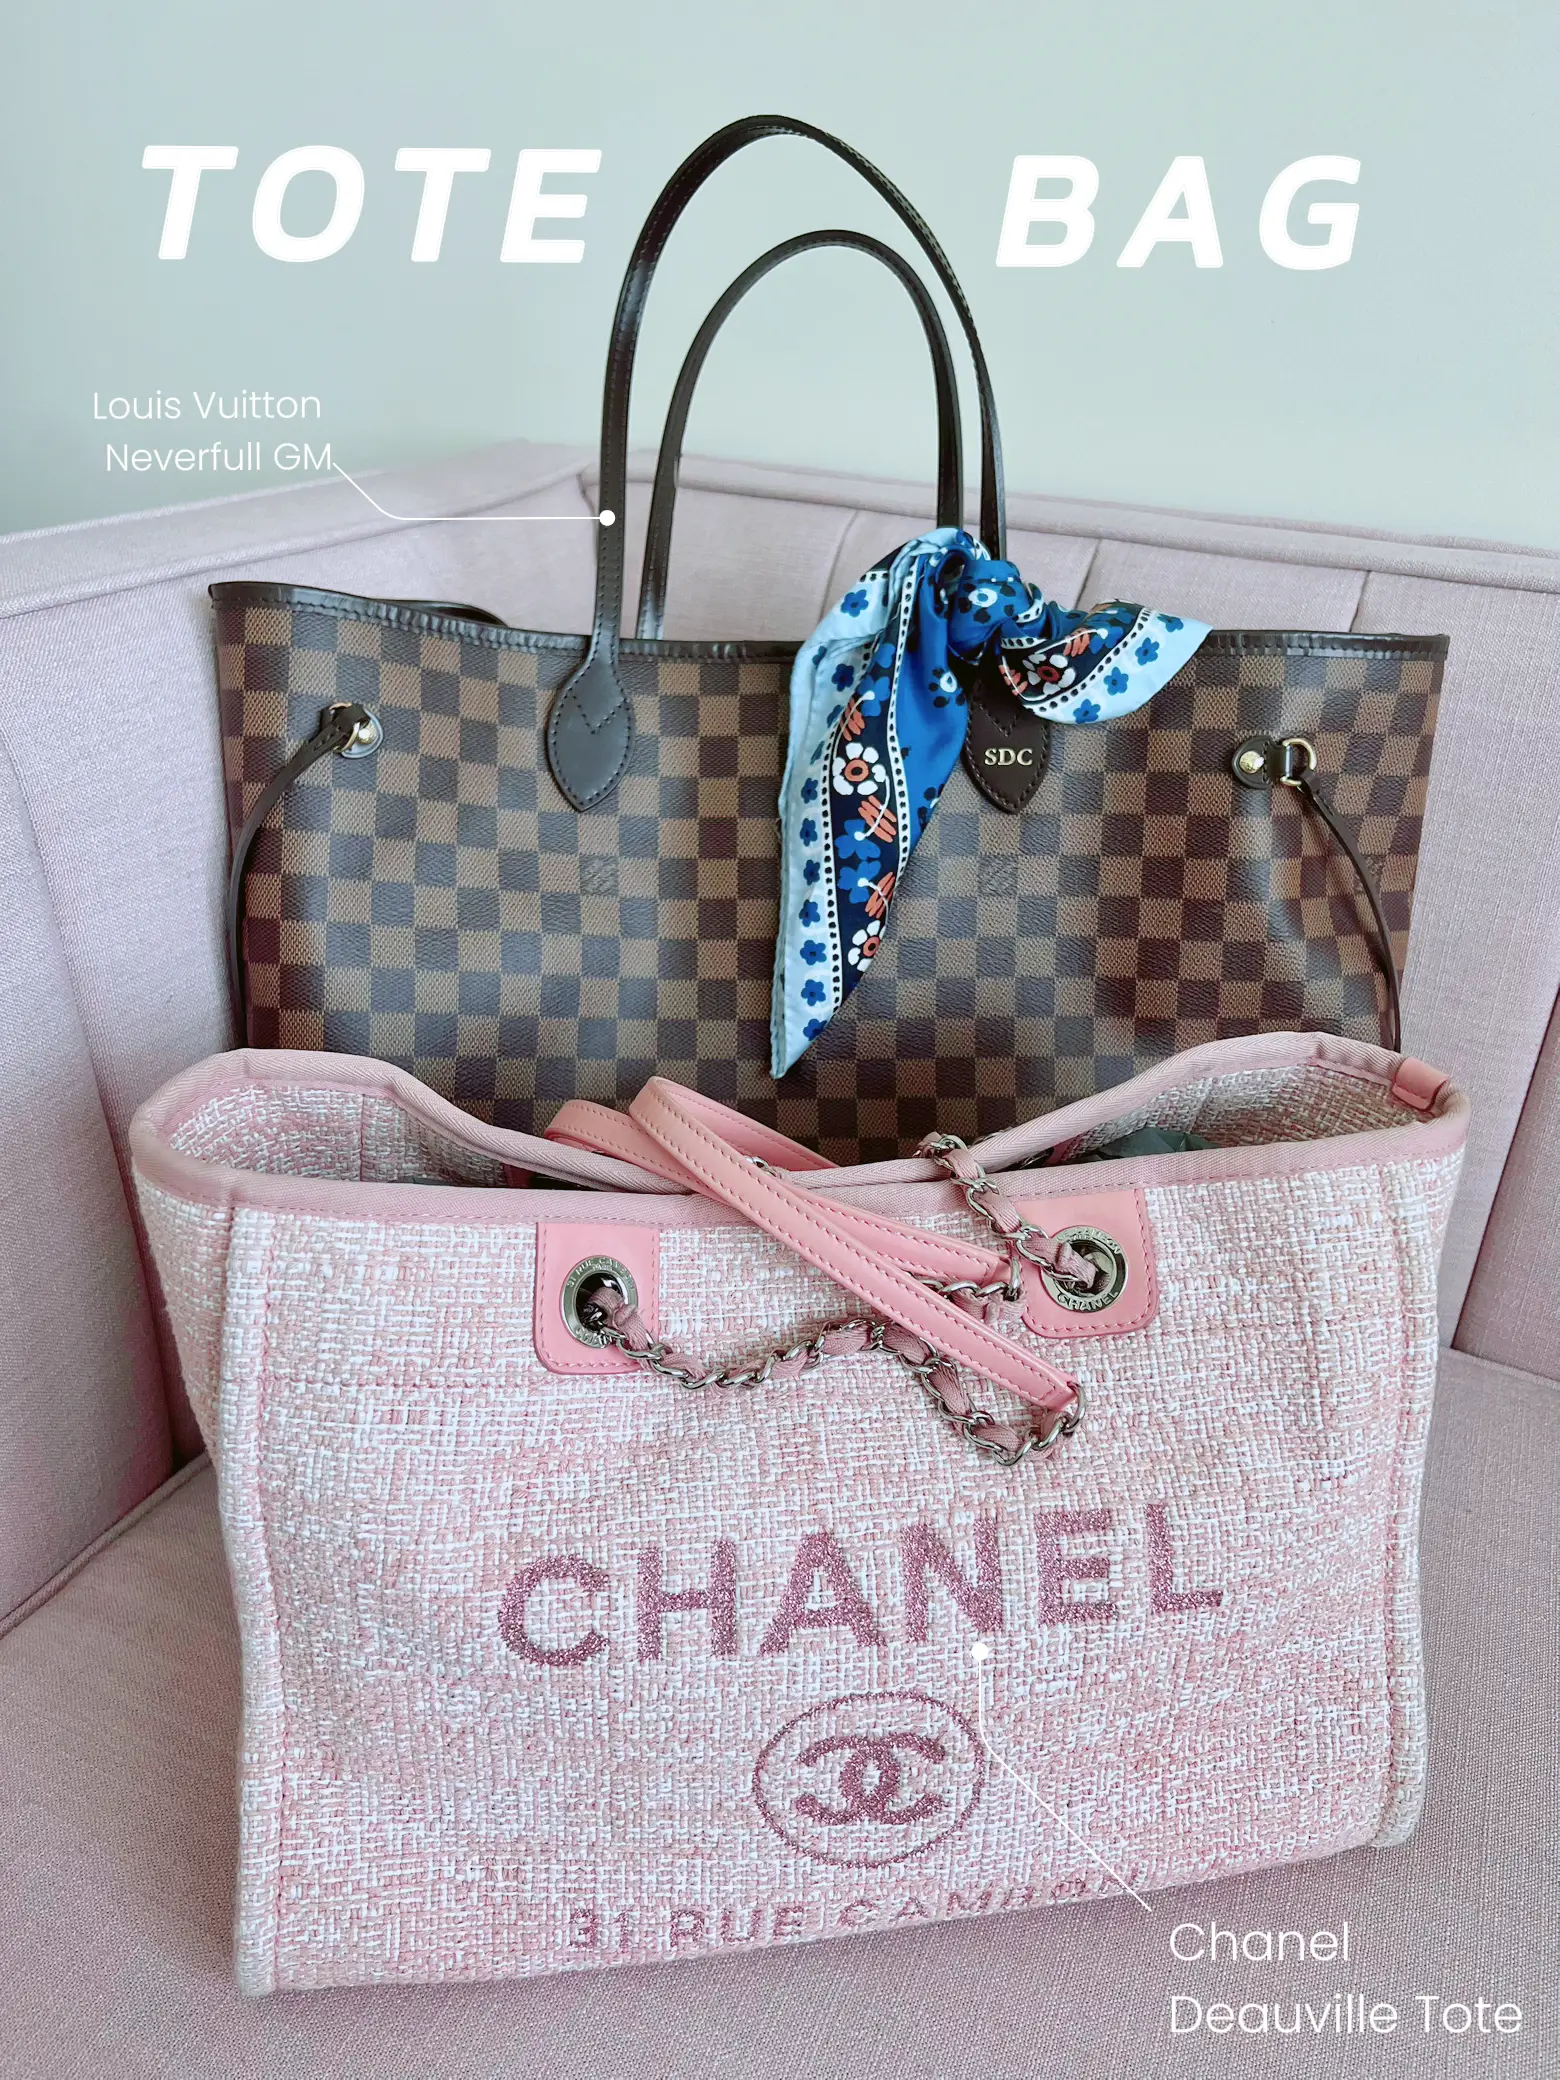 For Onthego GM/Carmel/Deauville Tote and More